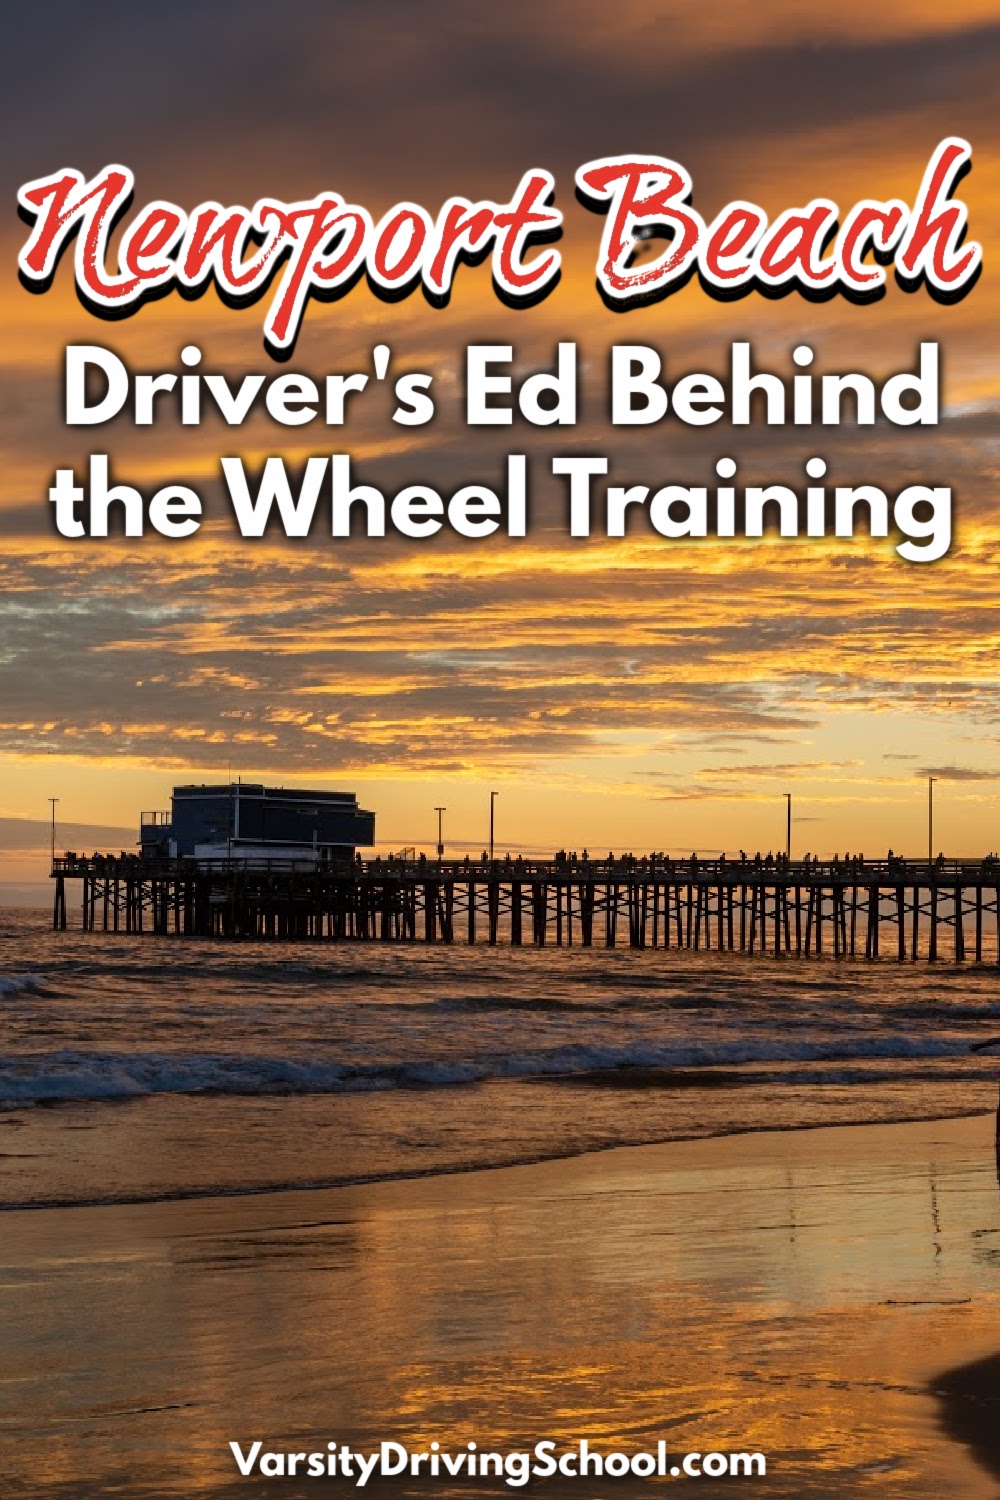 The best Newport Beach drivers ed helps teens and adults learn how to drive defensively to ensure higher odds of remaining safe while driving.